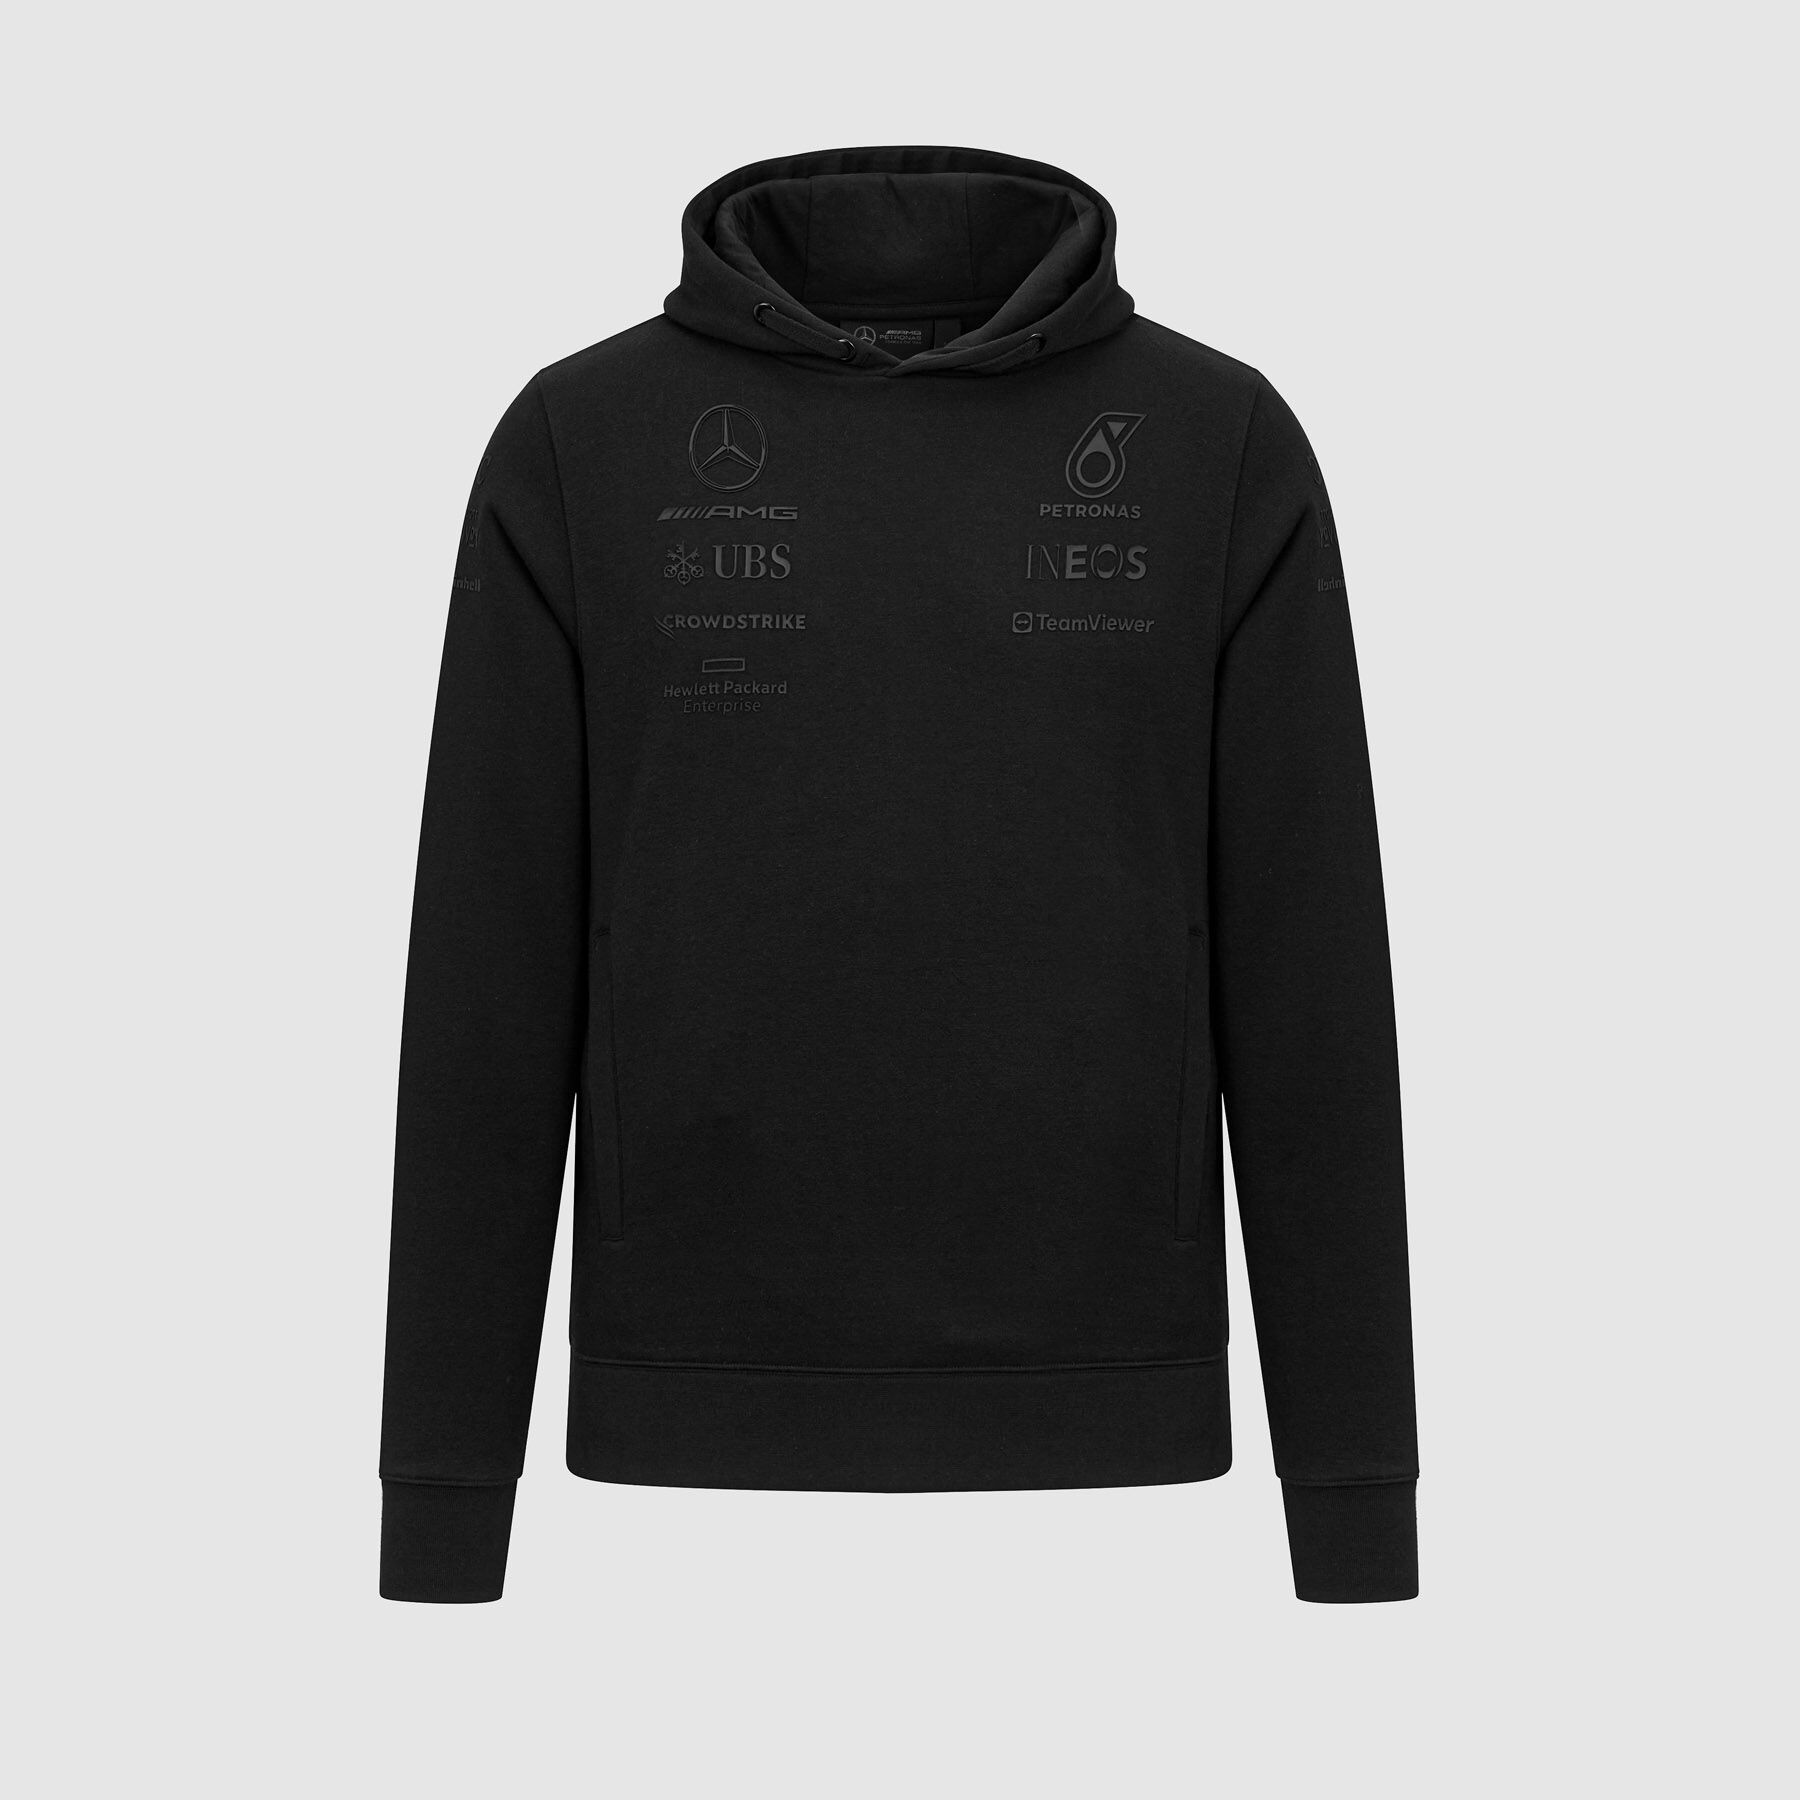 2023 Team Hoodie - Stealth Edition - Mercedes-AMG F1 | Fuel For Fans